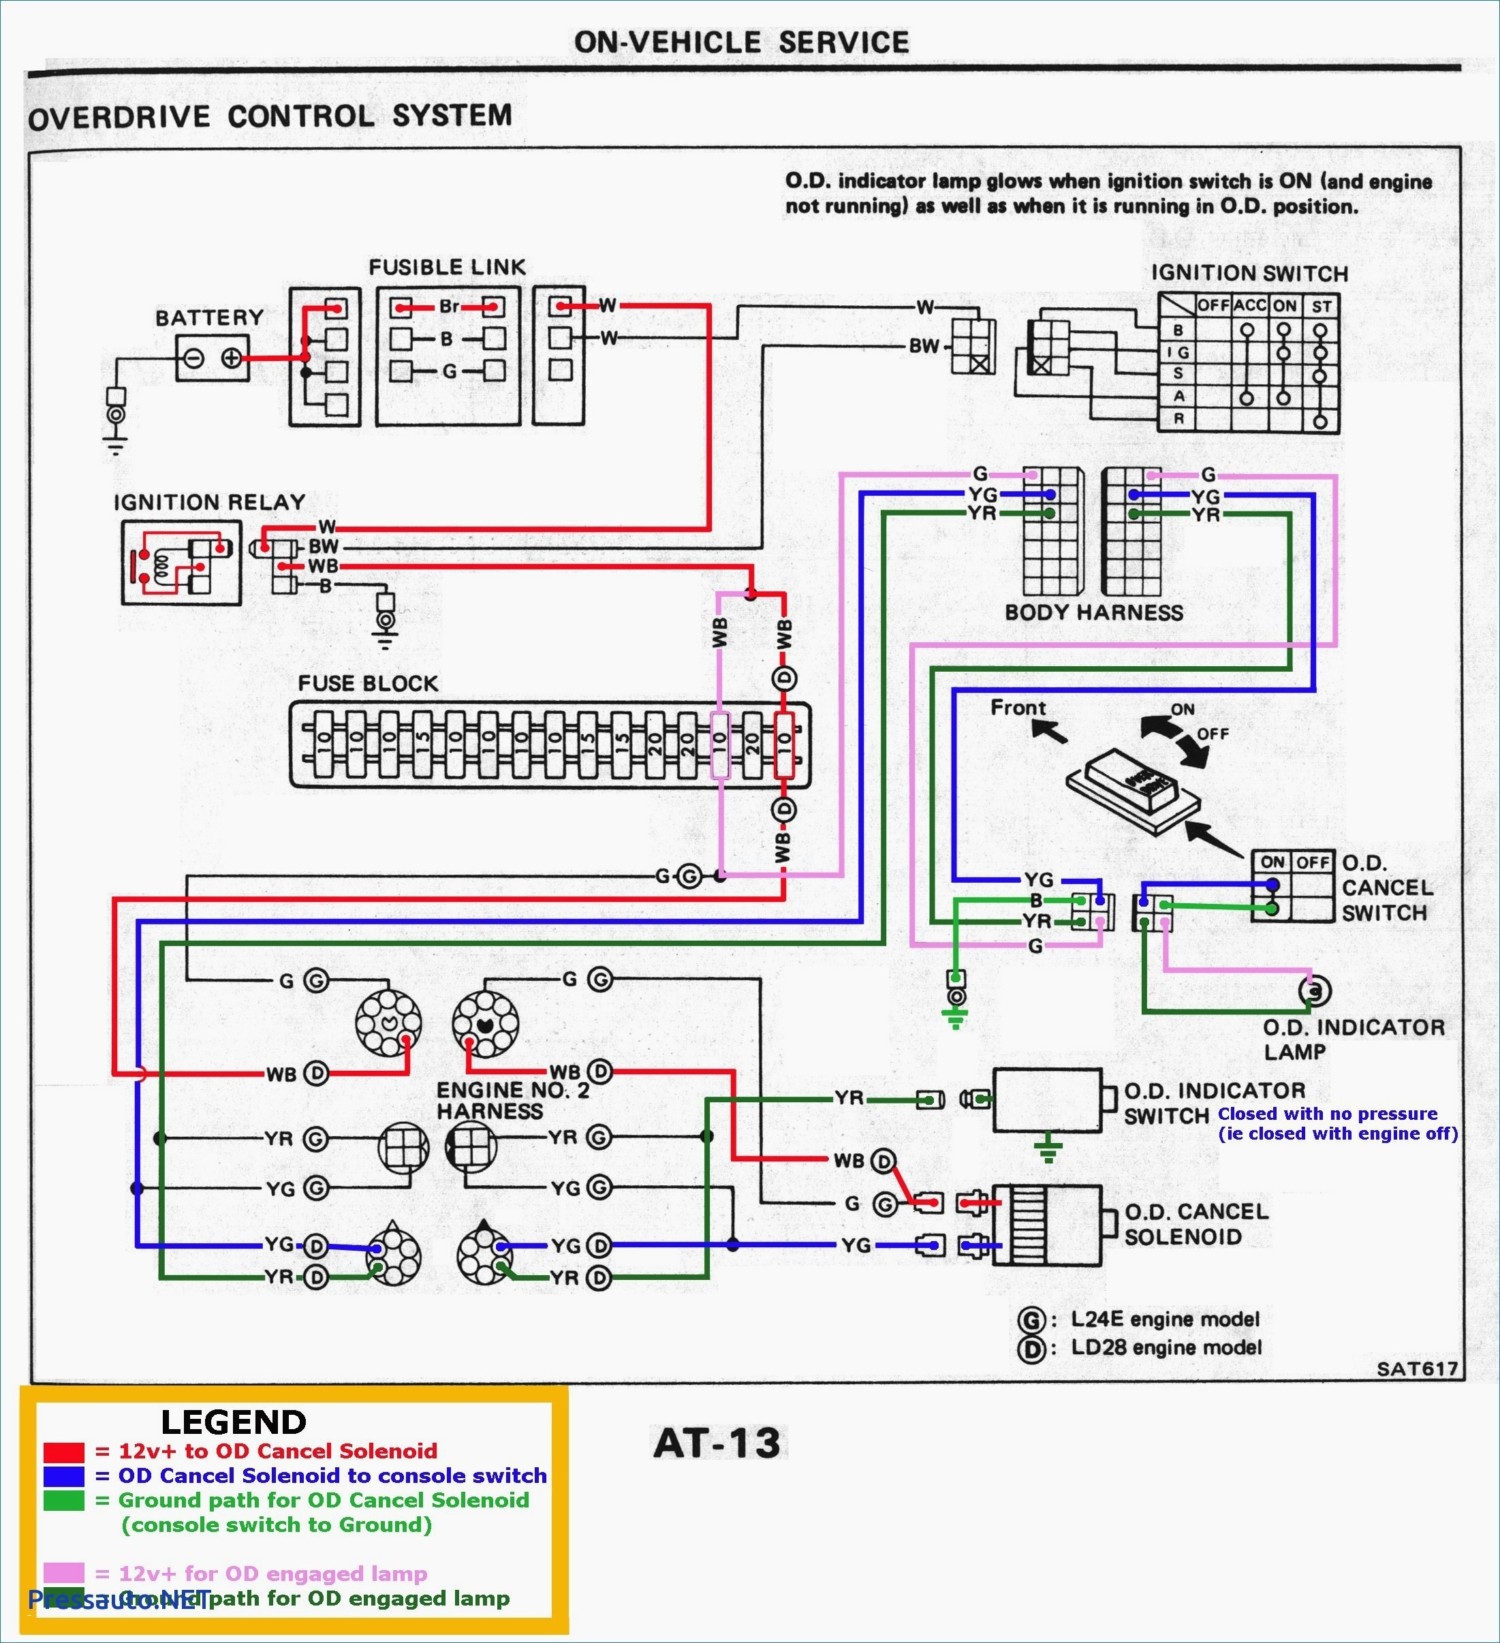 John Deere Lt160 Wiring Diagram Lawn Mower Ignition Switch Wiring Diagram Amazing for and Picture